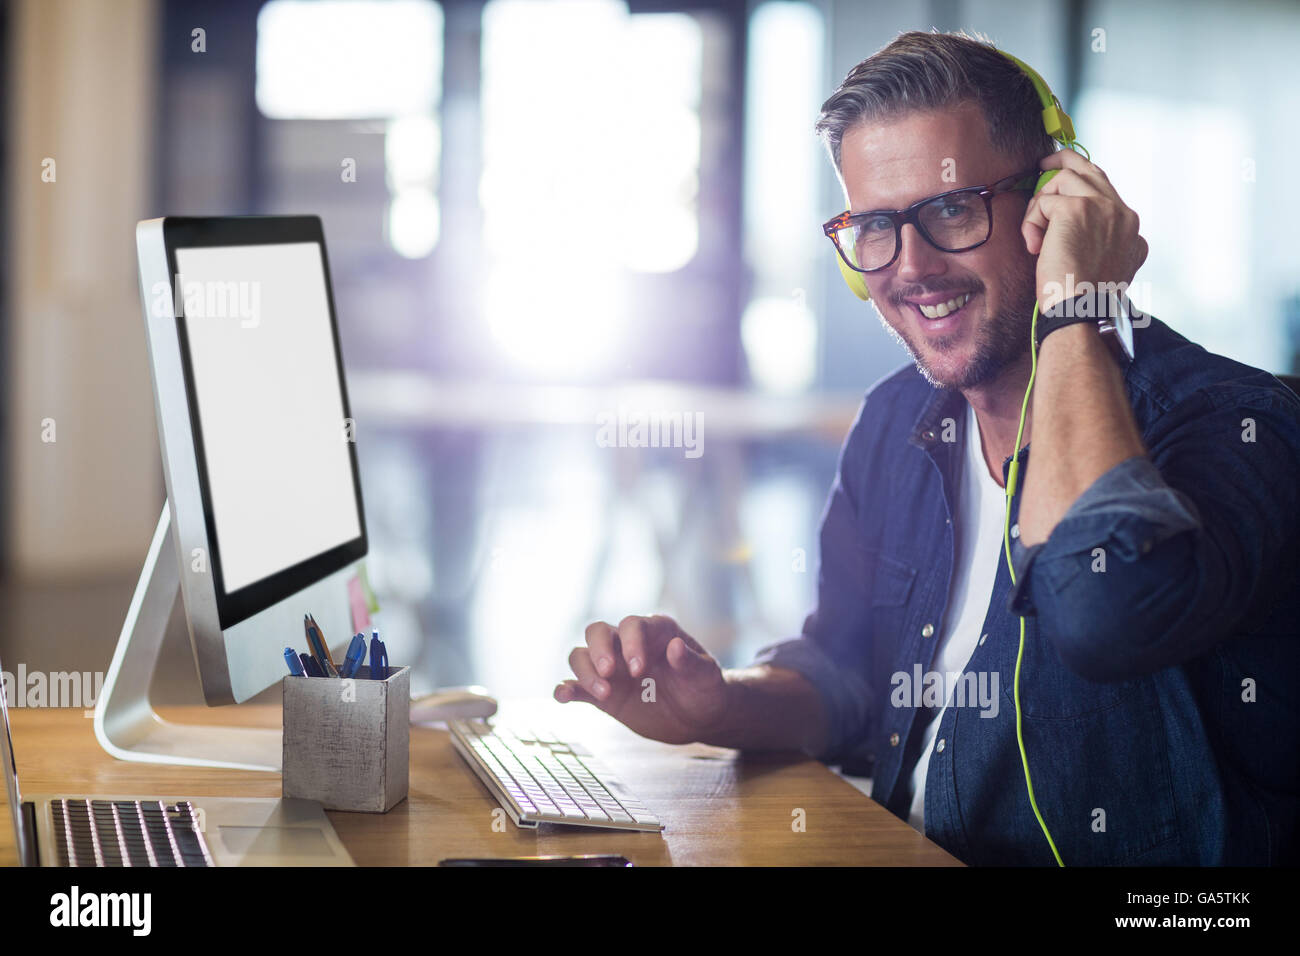 Portrait of smiling man with headphones in office Stock Photo